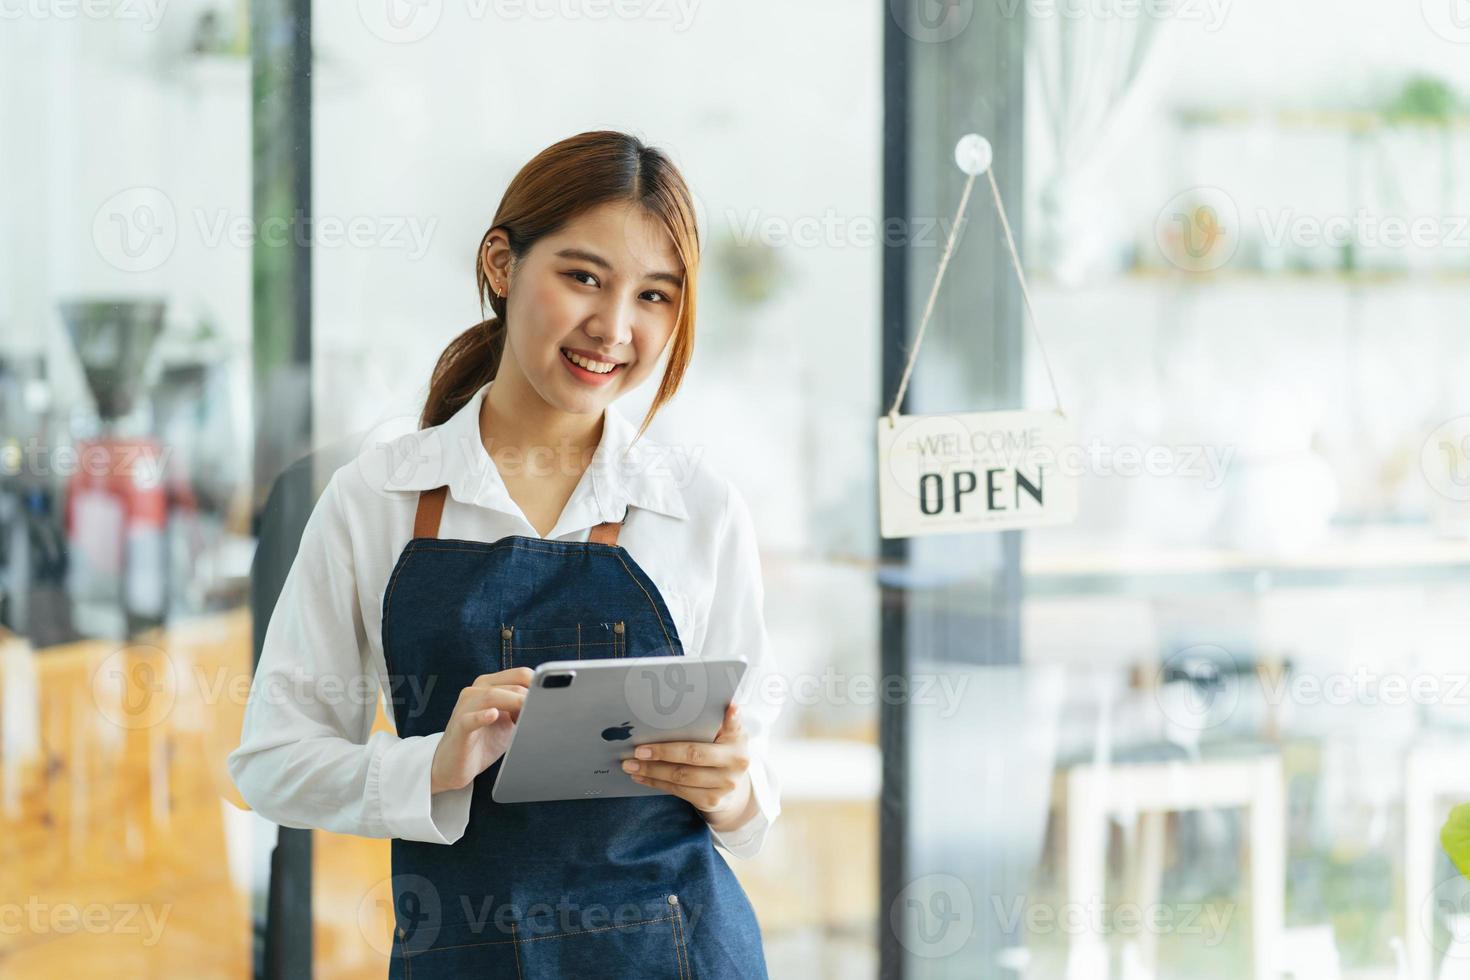 Smiling waitress or cafe business owner entrepreneur looking at camera photo